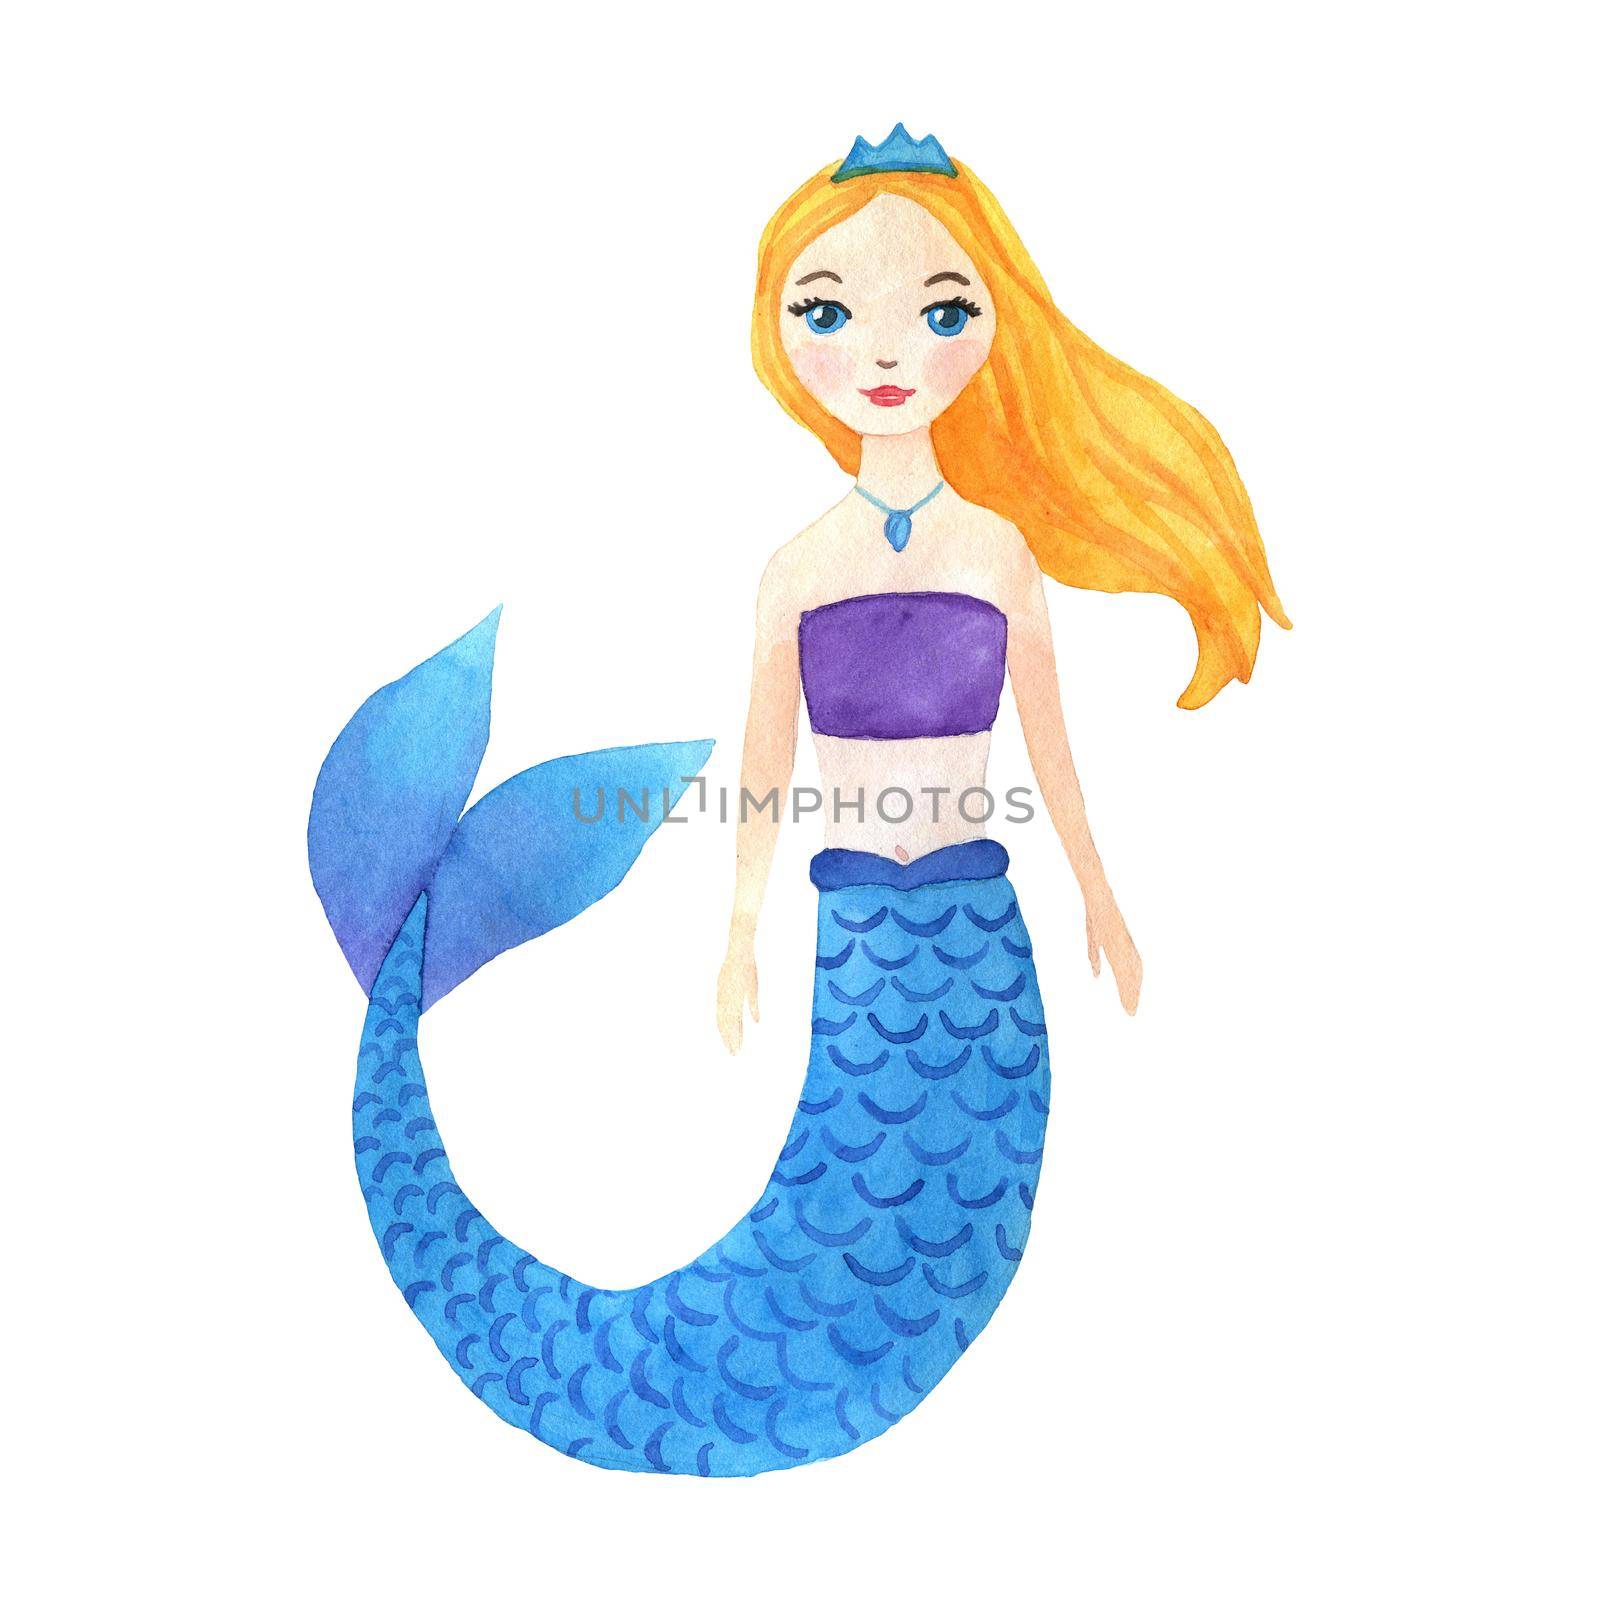 Cute mermaid watercolor illustration isolated on white